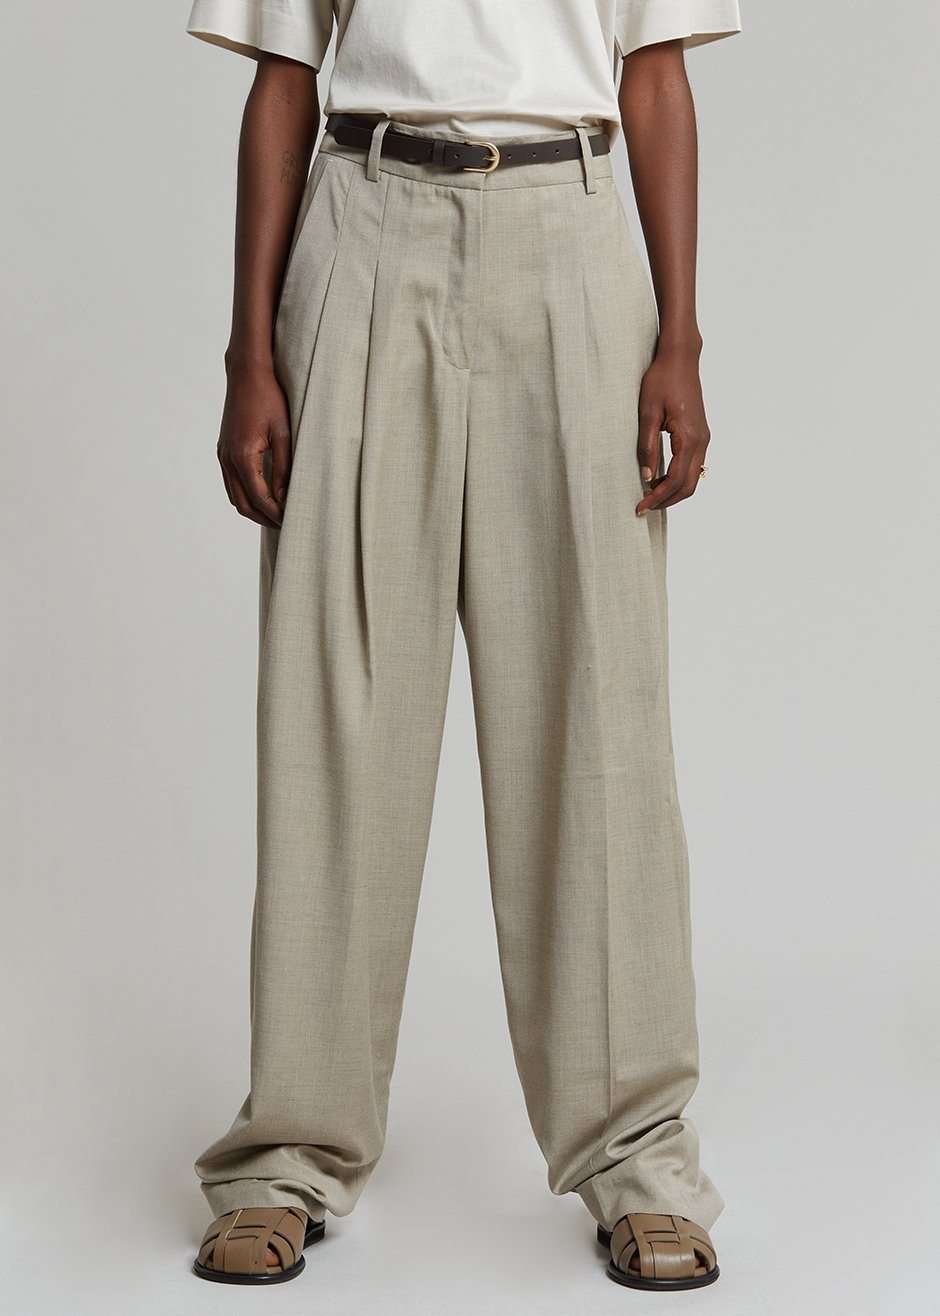 Gelso Pleated Trousers - Light Taupe Melange - 3